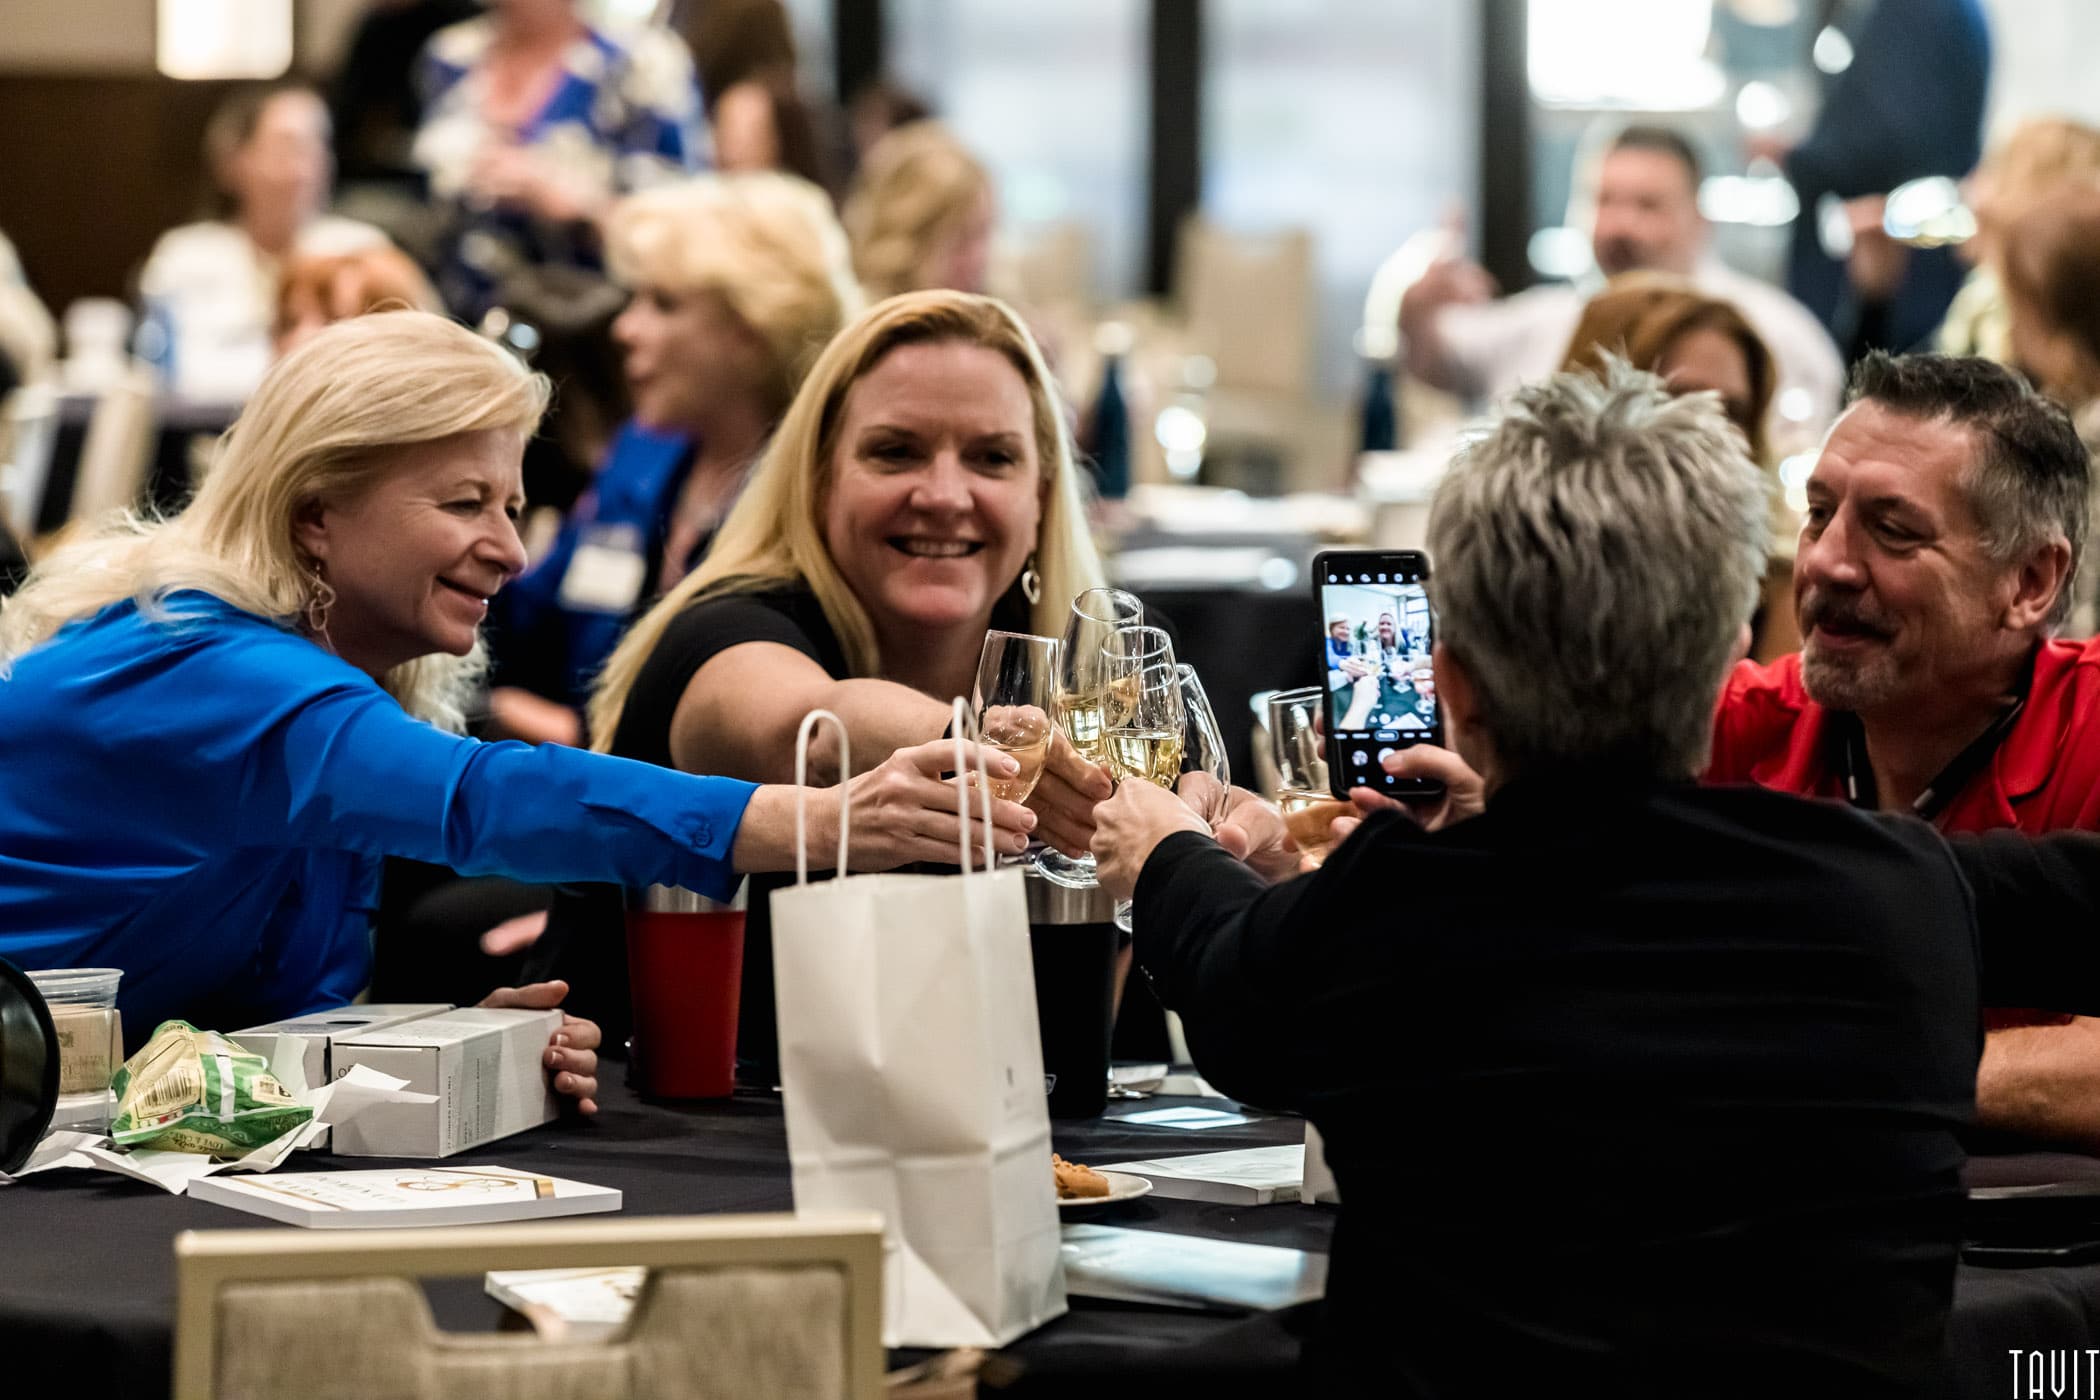 People toasting at business event